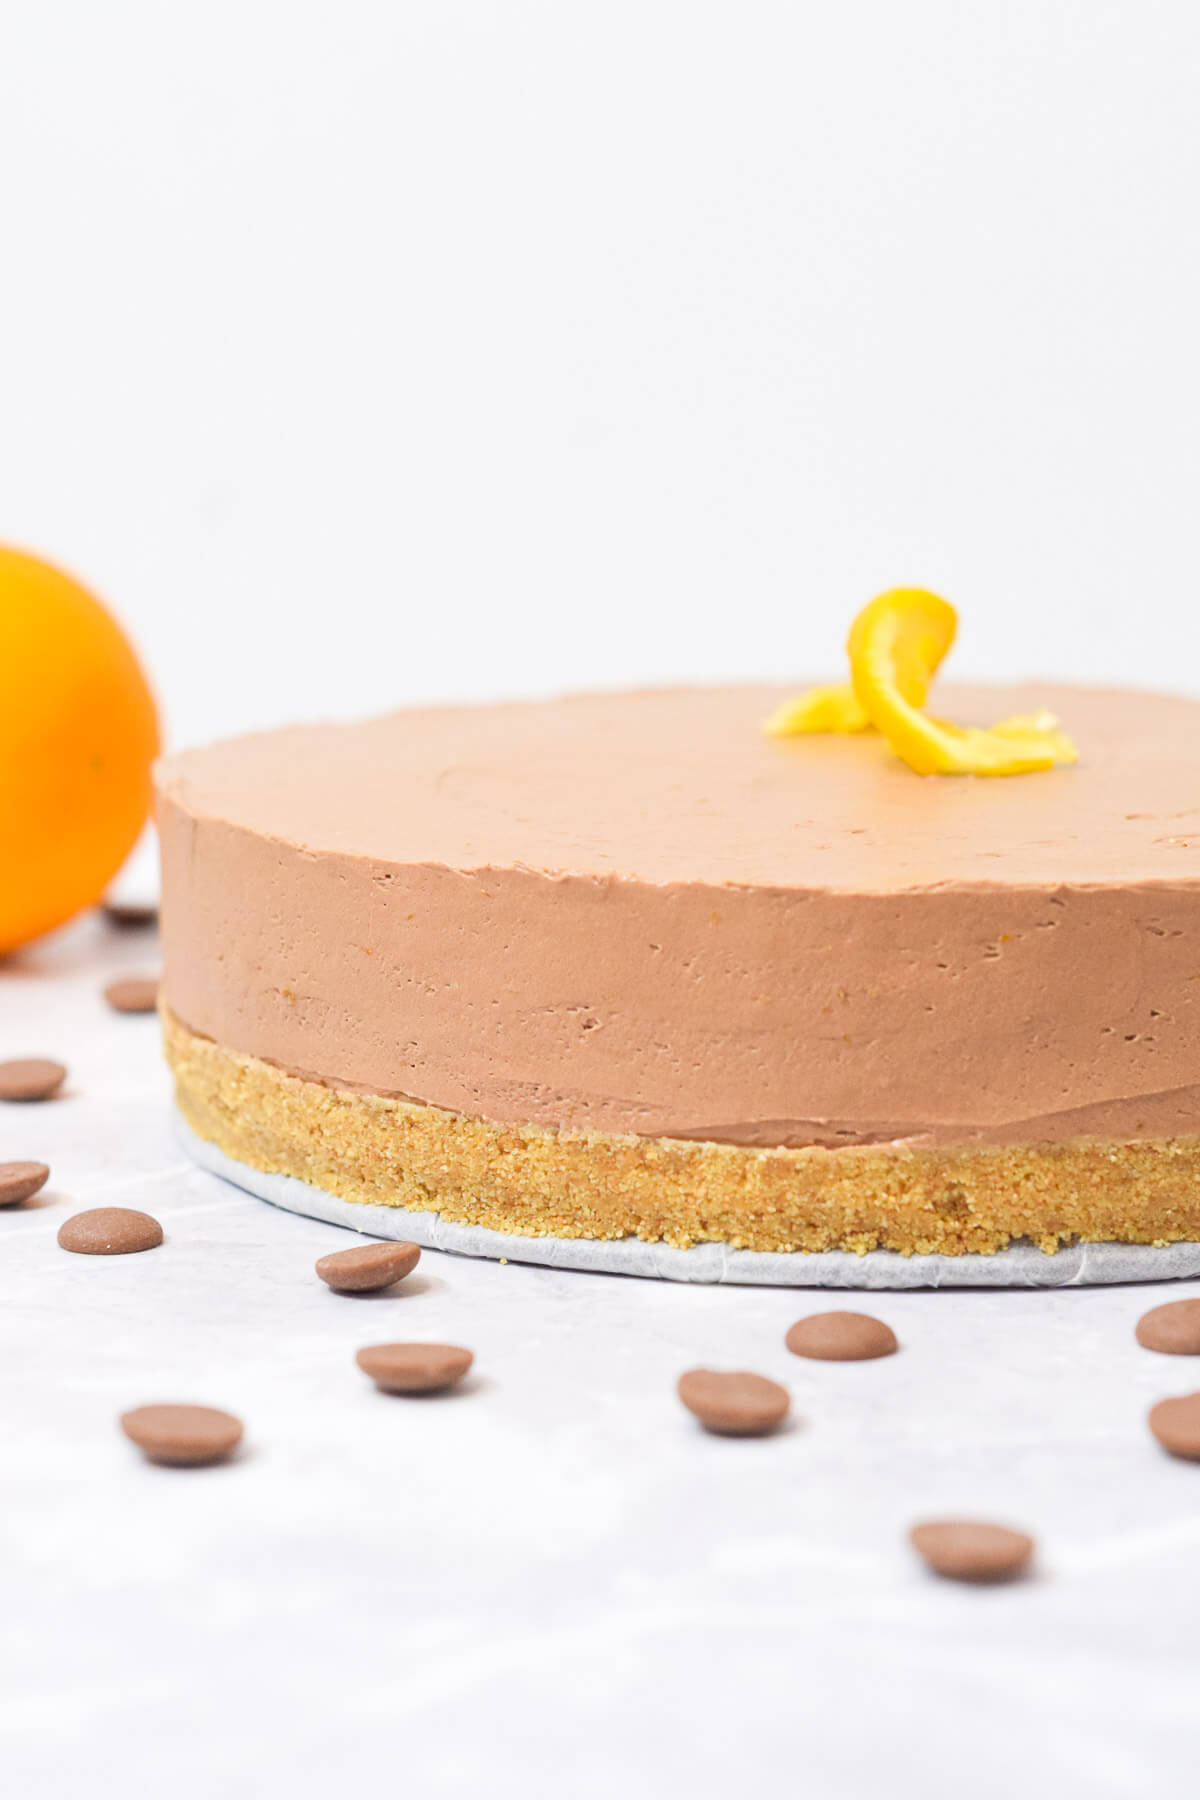 chocolate orange cheesecake with graham cracker crust topped with a twisted orange.